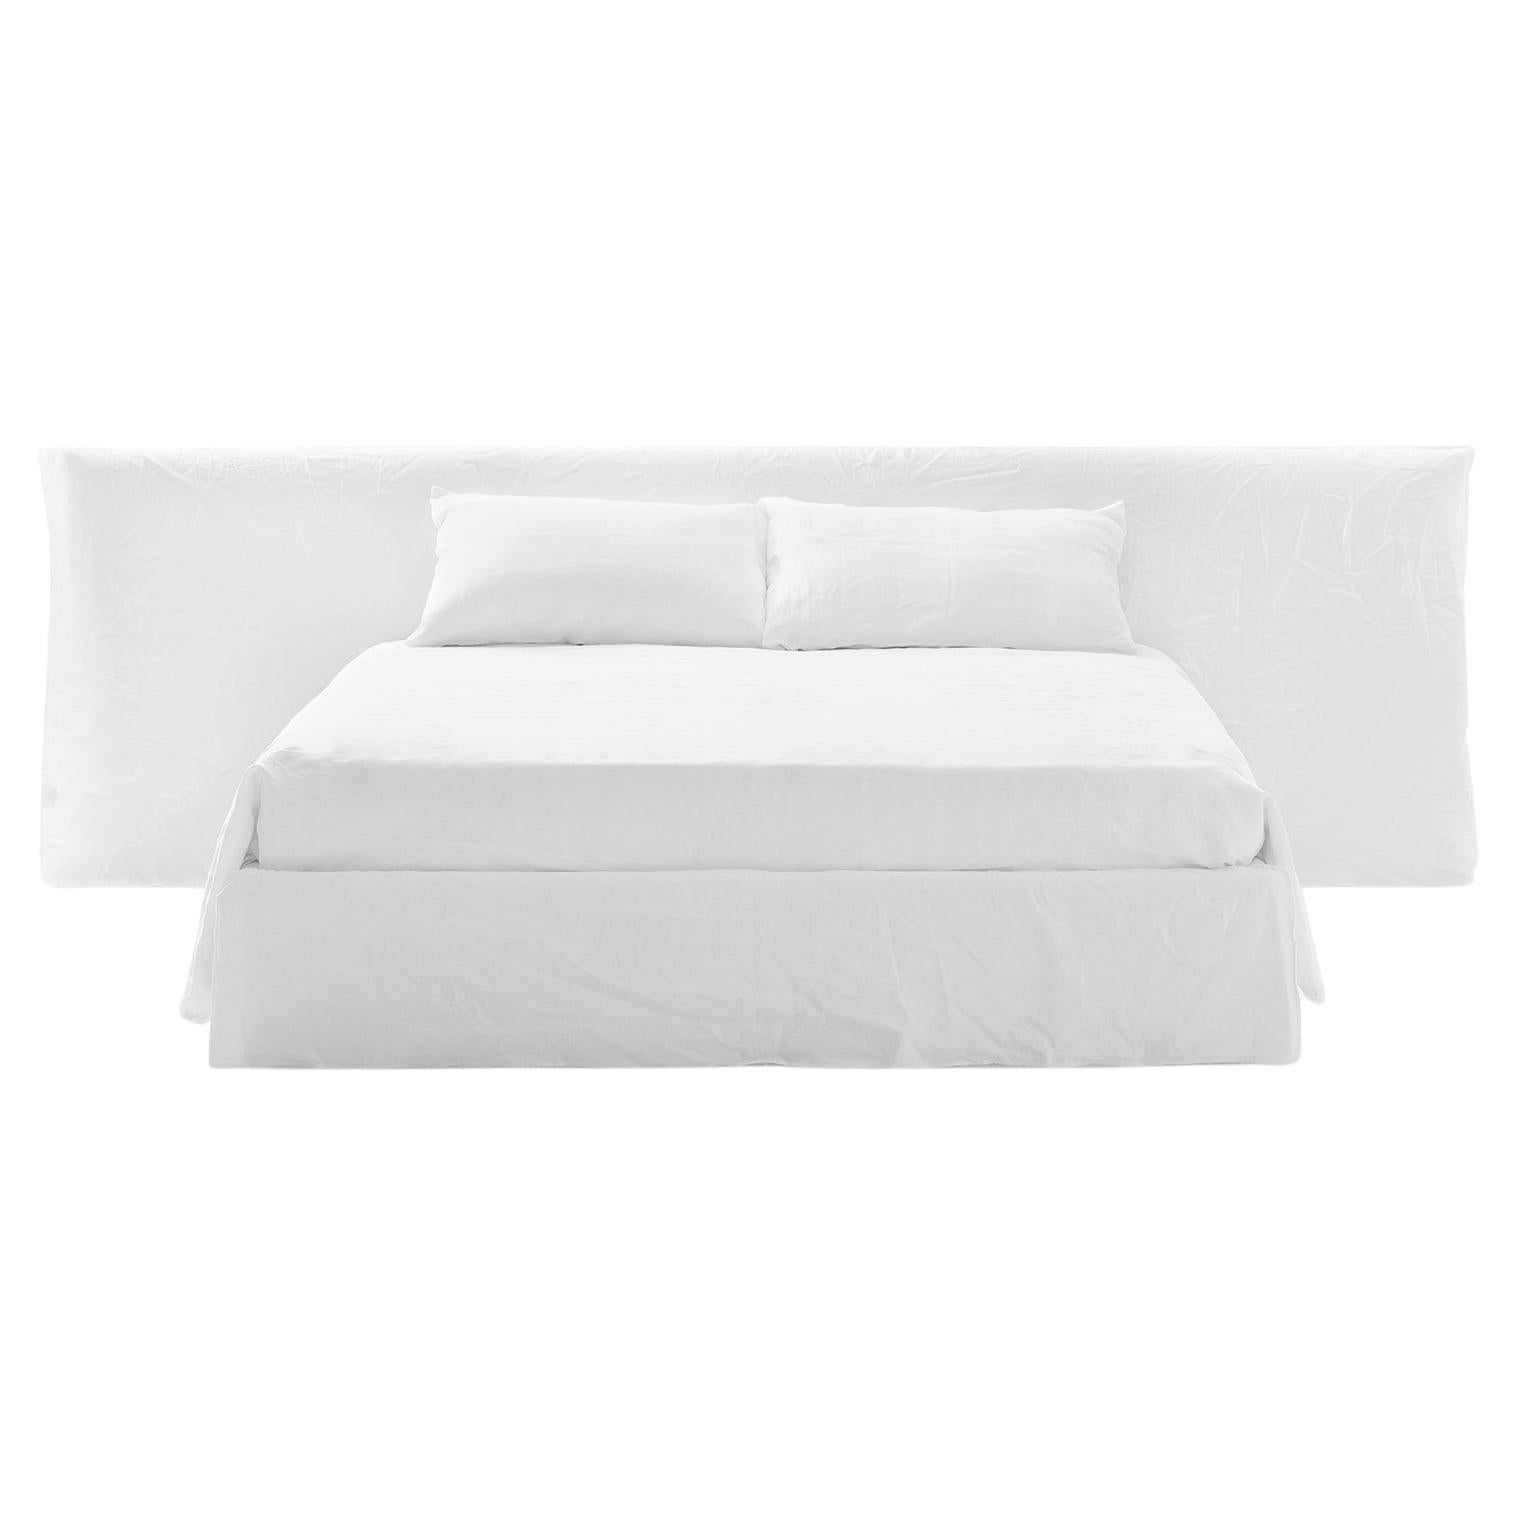 Gervasoni Ghost 81 E Knock Down Bed in White Linen Upholstery by Paola Navone For Sale